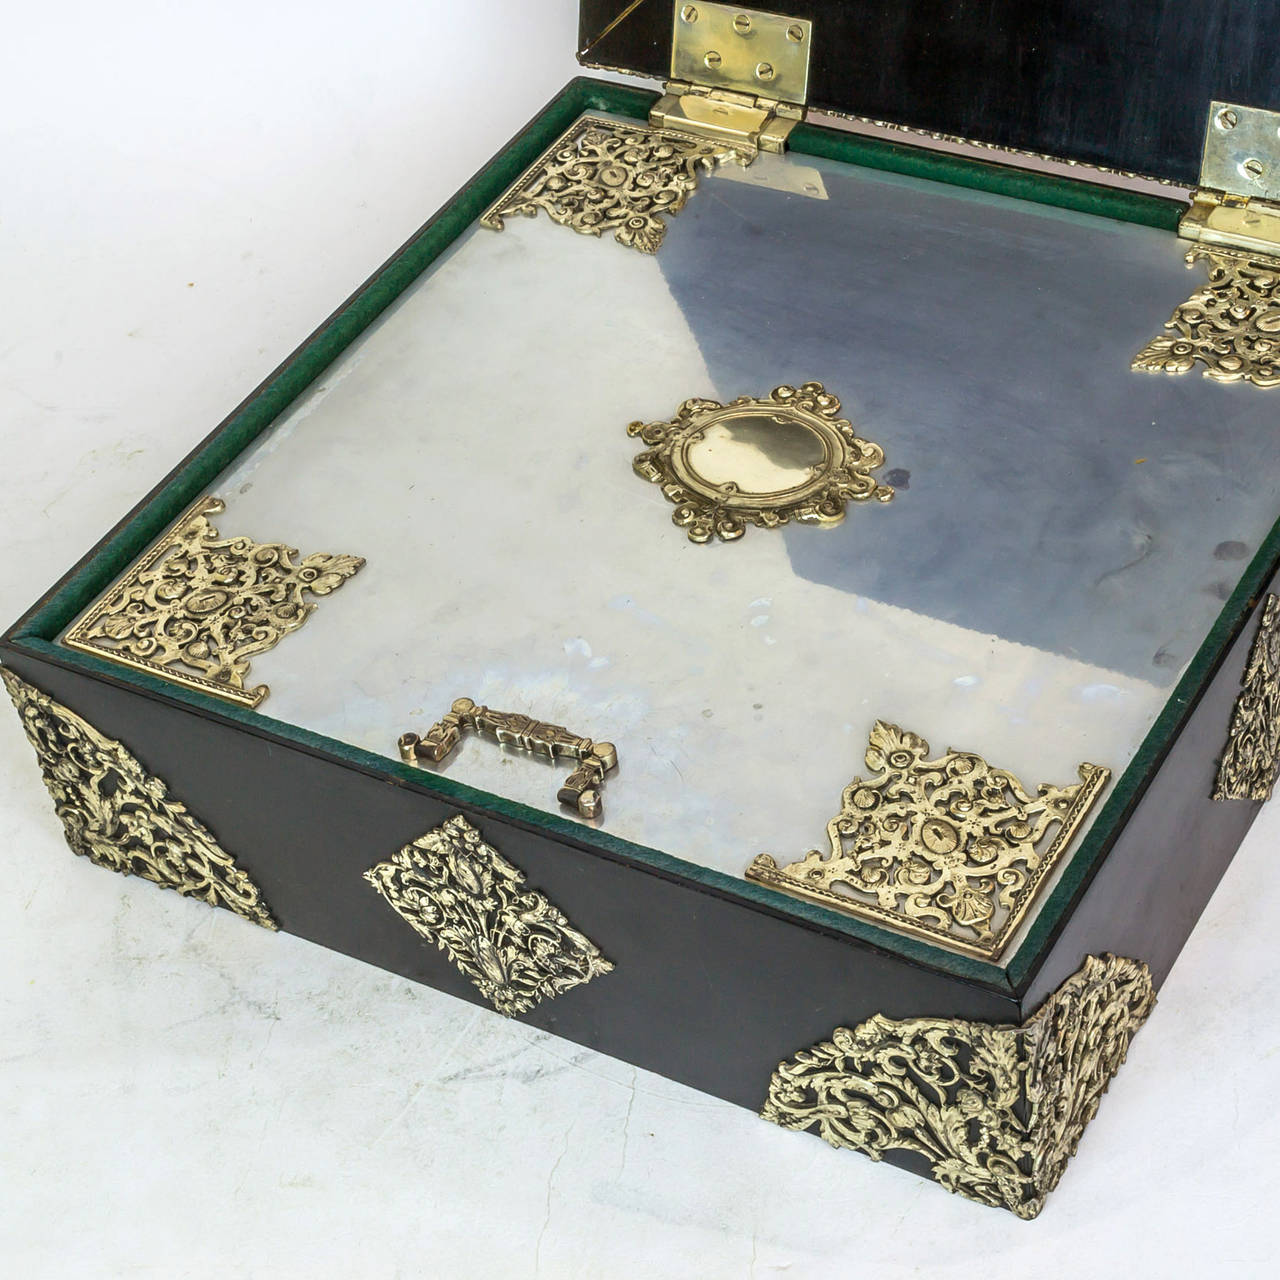 A Fine Silvered Metal and Velvet Humidor Box Attributed to Caldwell & Co.
Stock Number: DA78